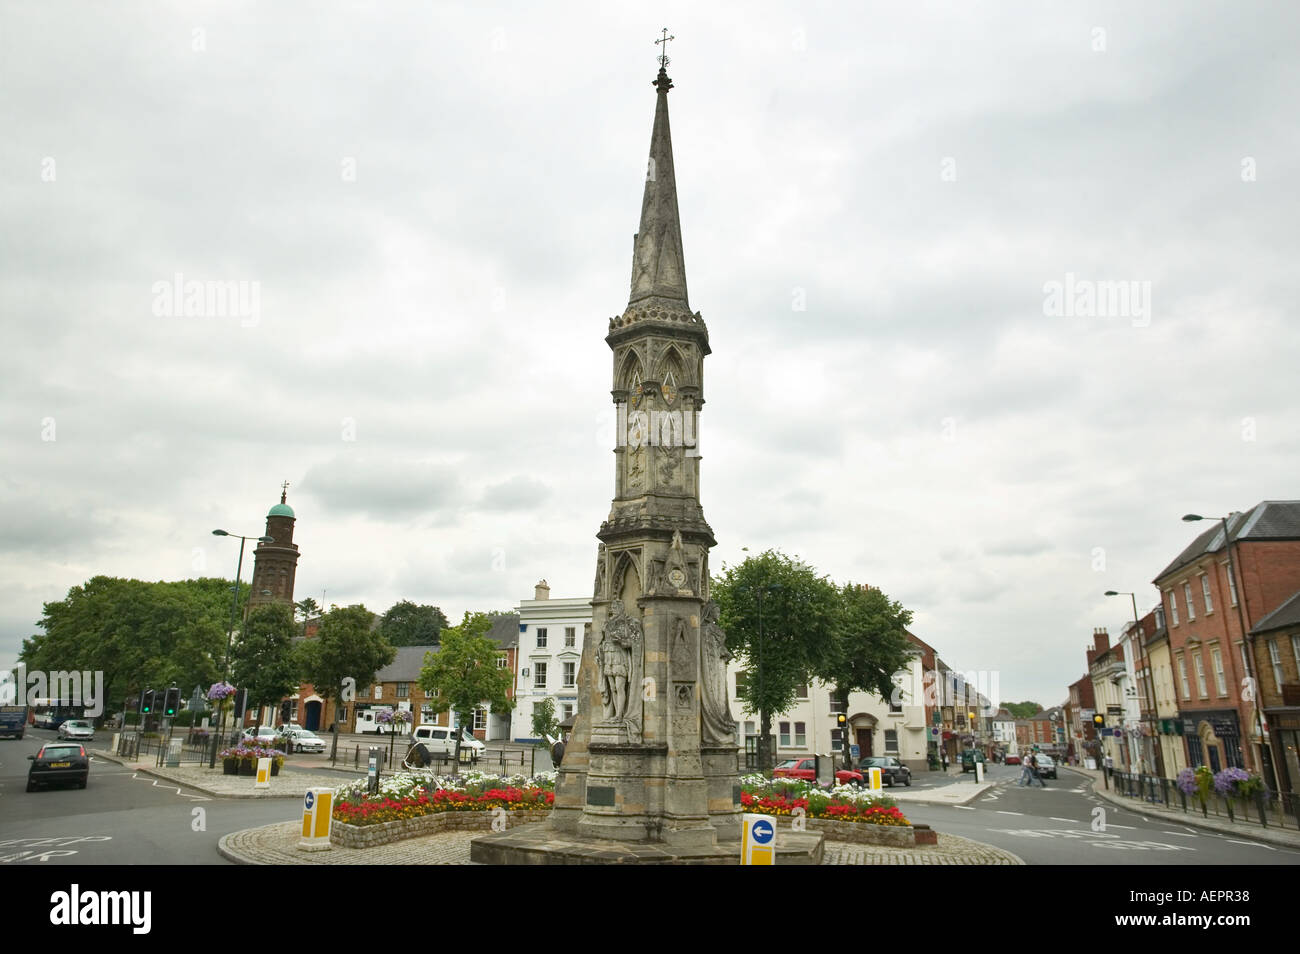 The Banbury Cross monument in the town of Banbury in Oxfordshire Stock Photo